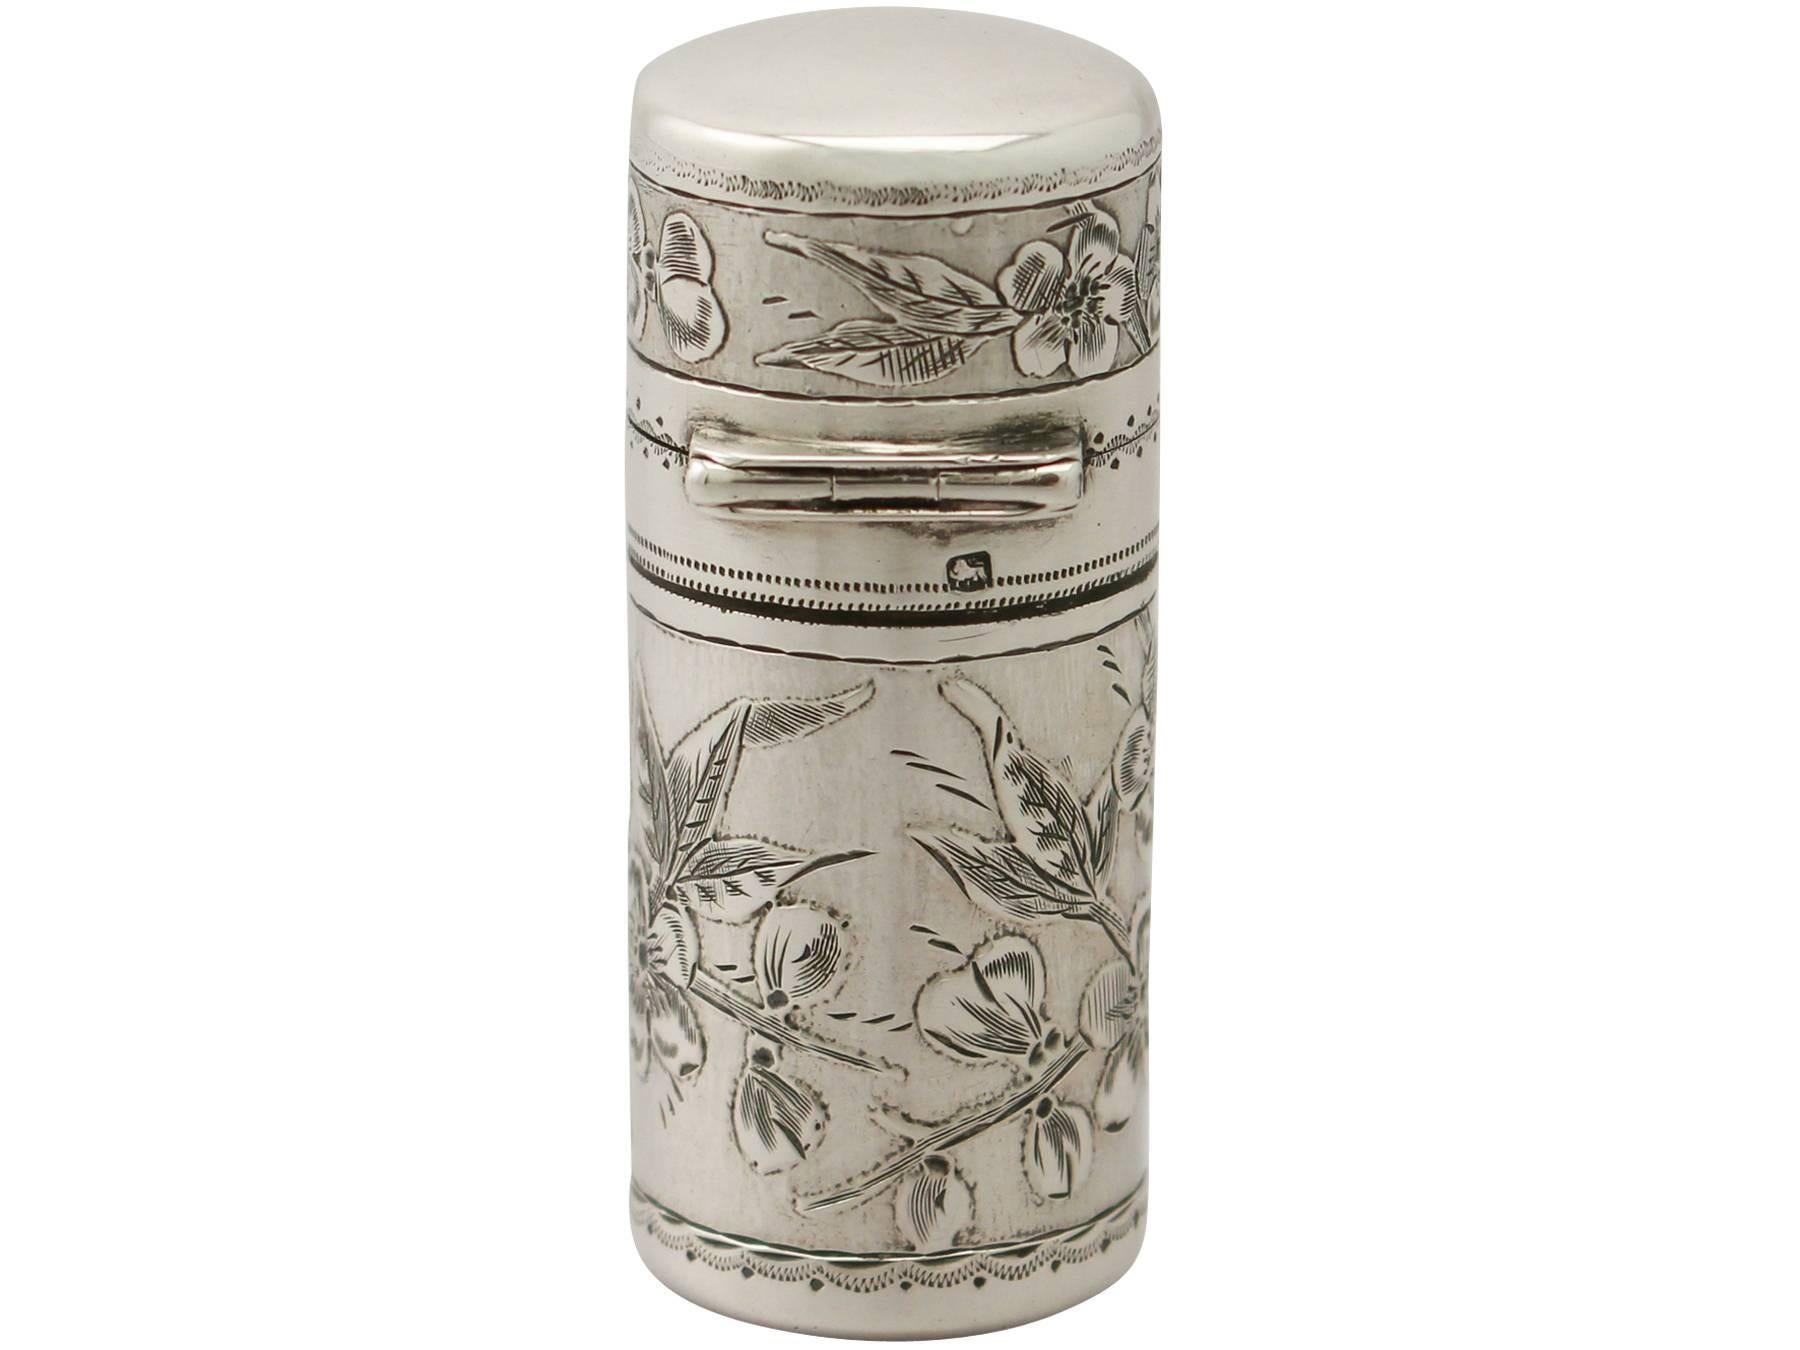 English Sterling Silver Scent Flask by Sampson Mordan & Co, Antique Victorian